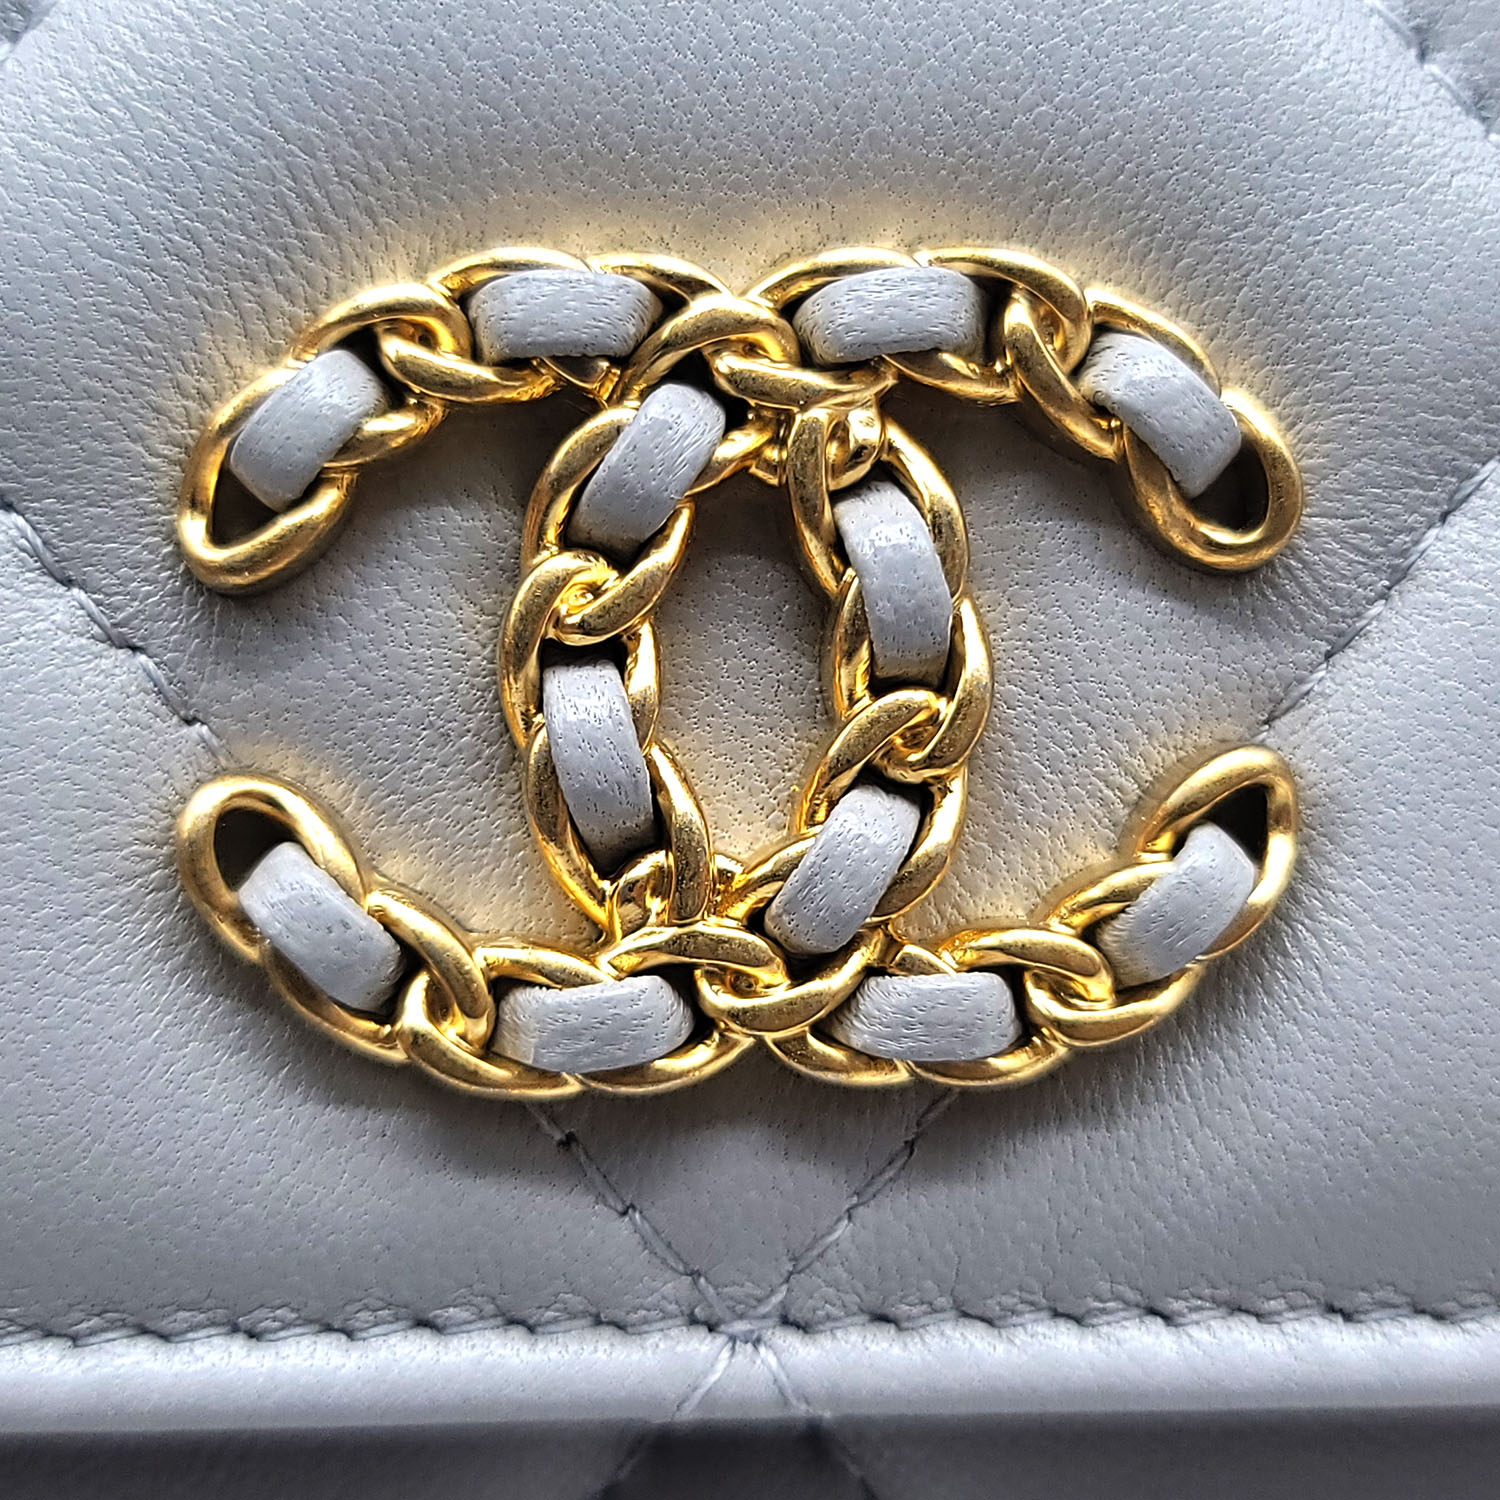 Chanel #Chanel19 Flap Coin Purse With Chain - BAGAHOLICBOY